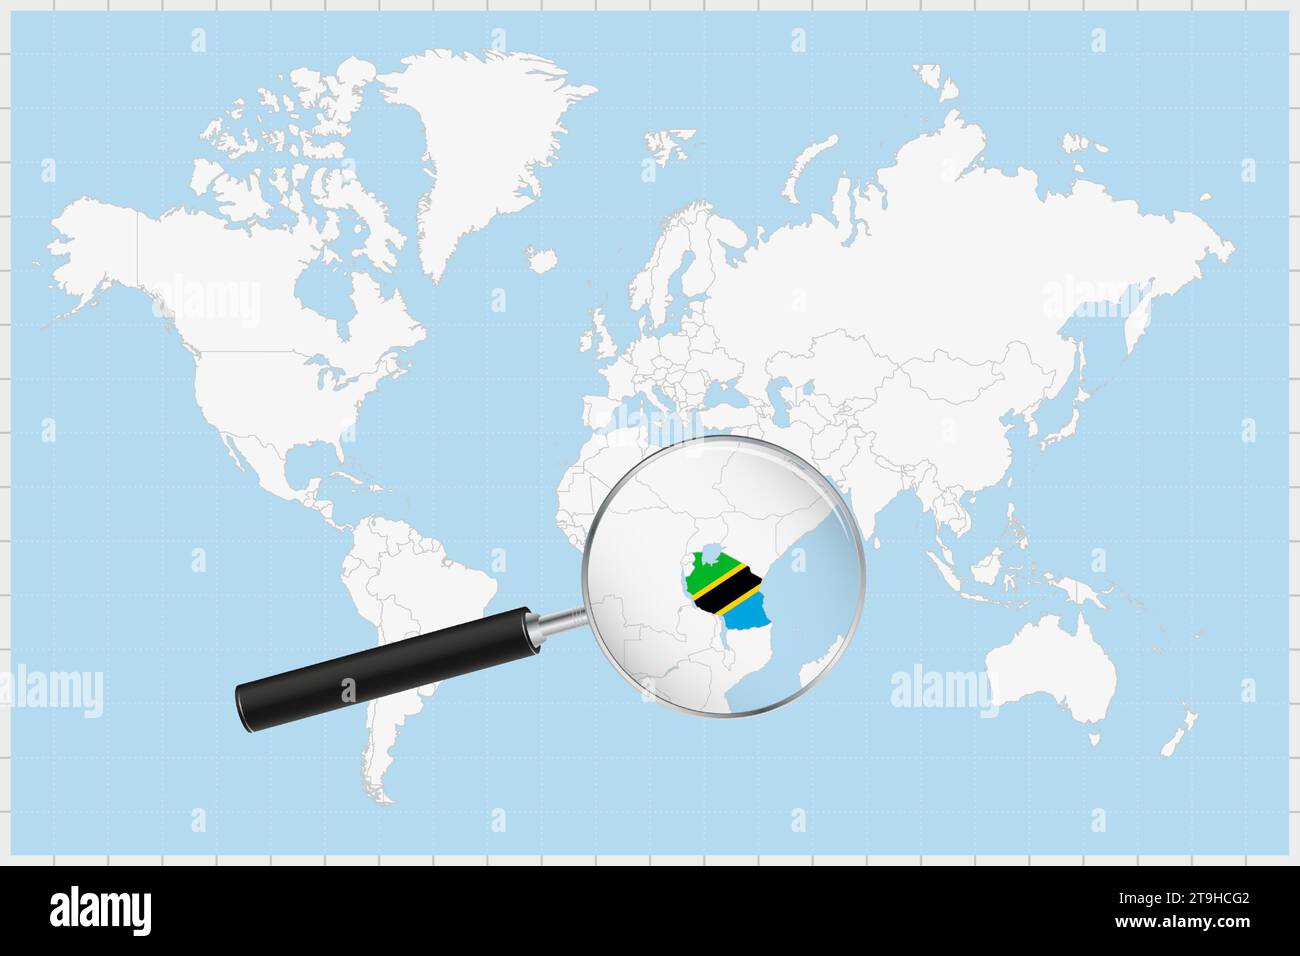 Magnifying glass showing a map of Tanzania on a world map. Tanzania flag and map enlarge in lens. Vector Illustration. Stock Vector